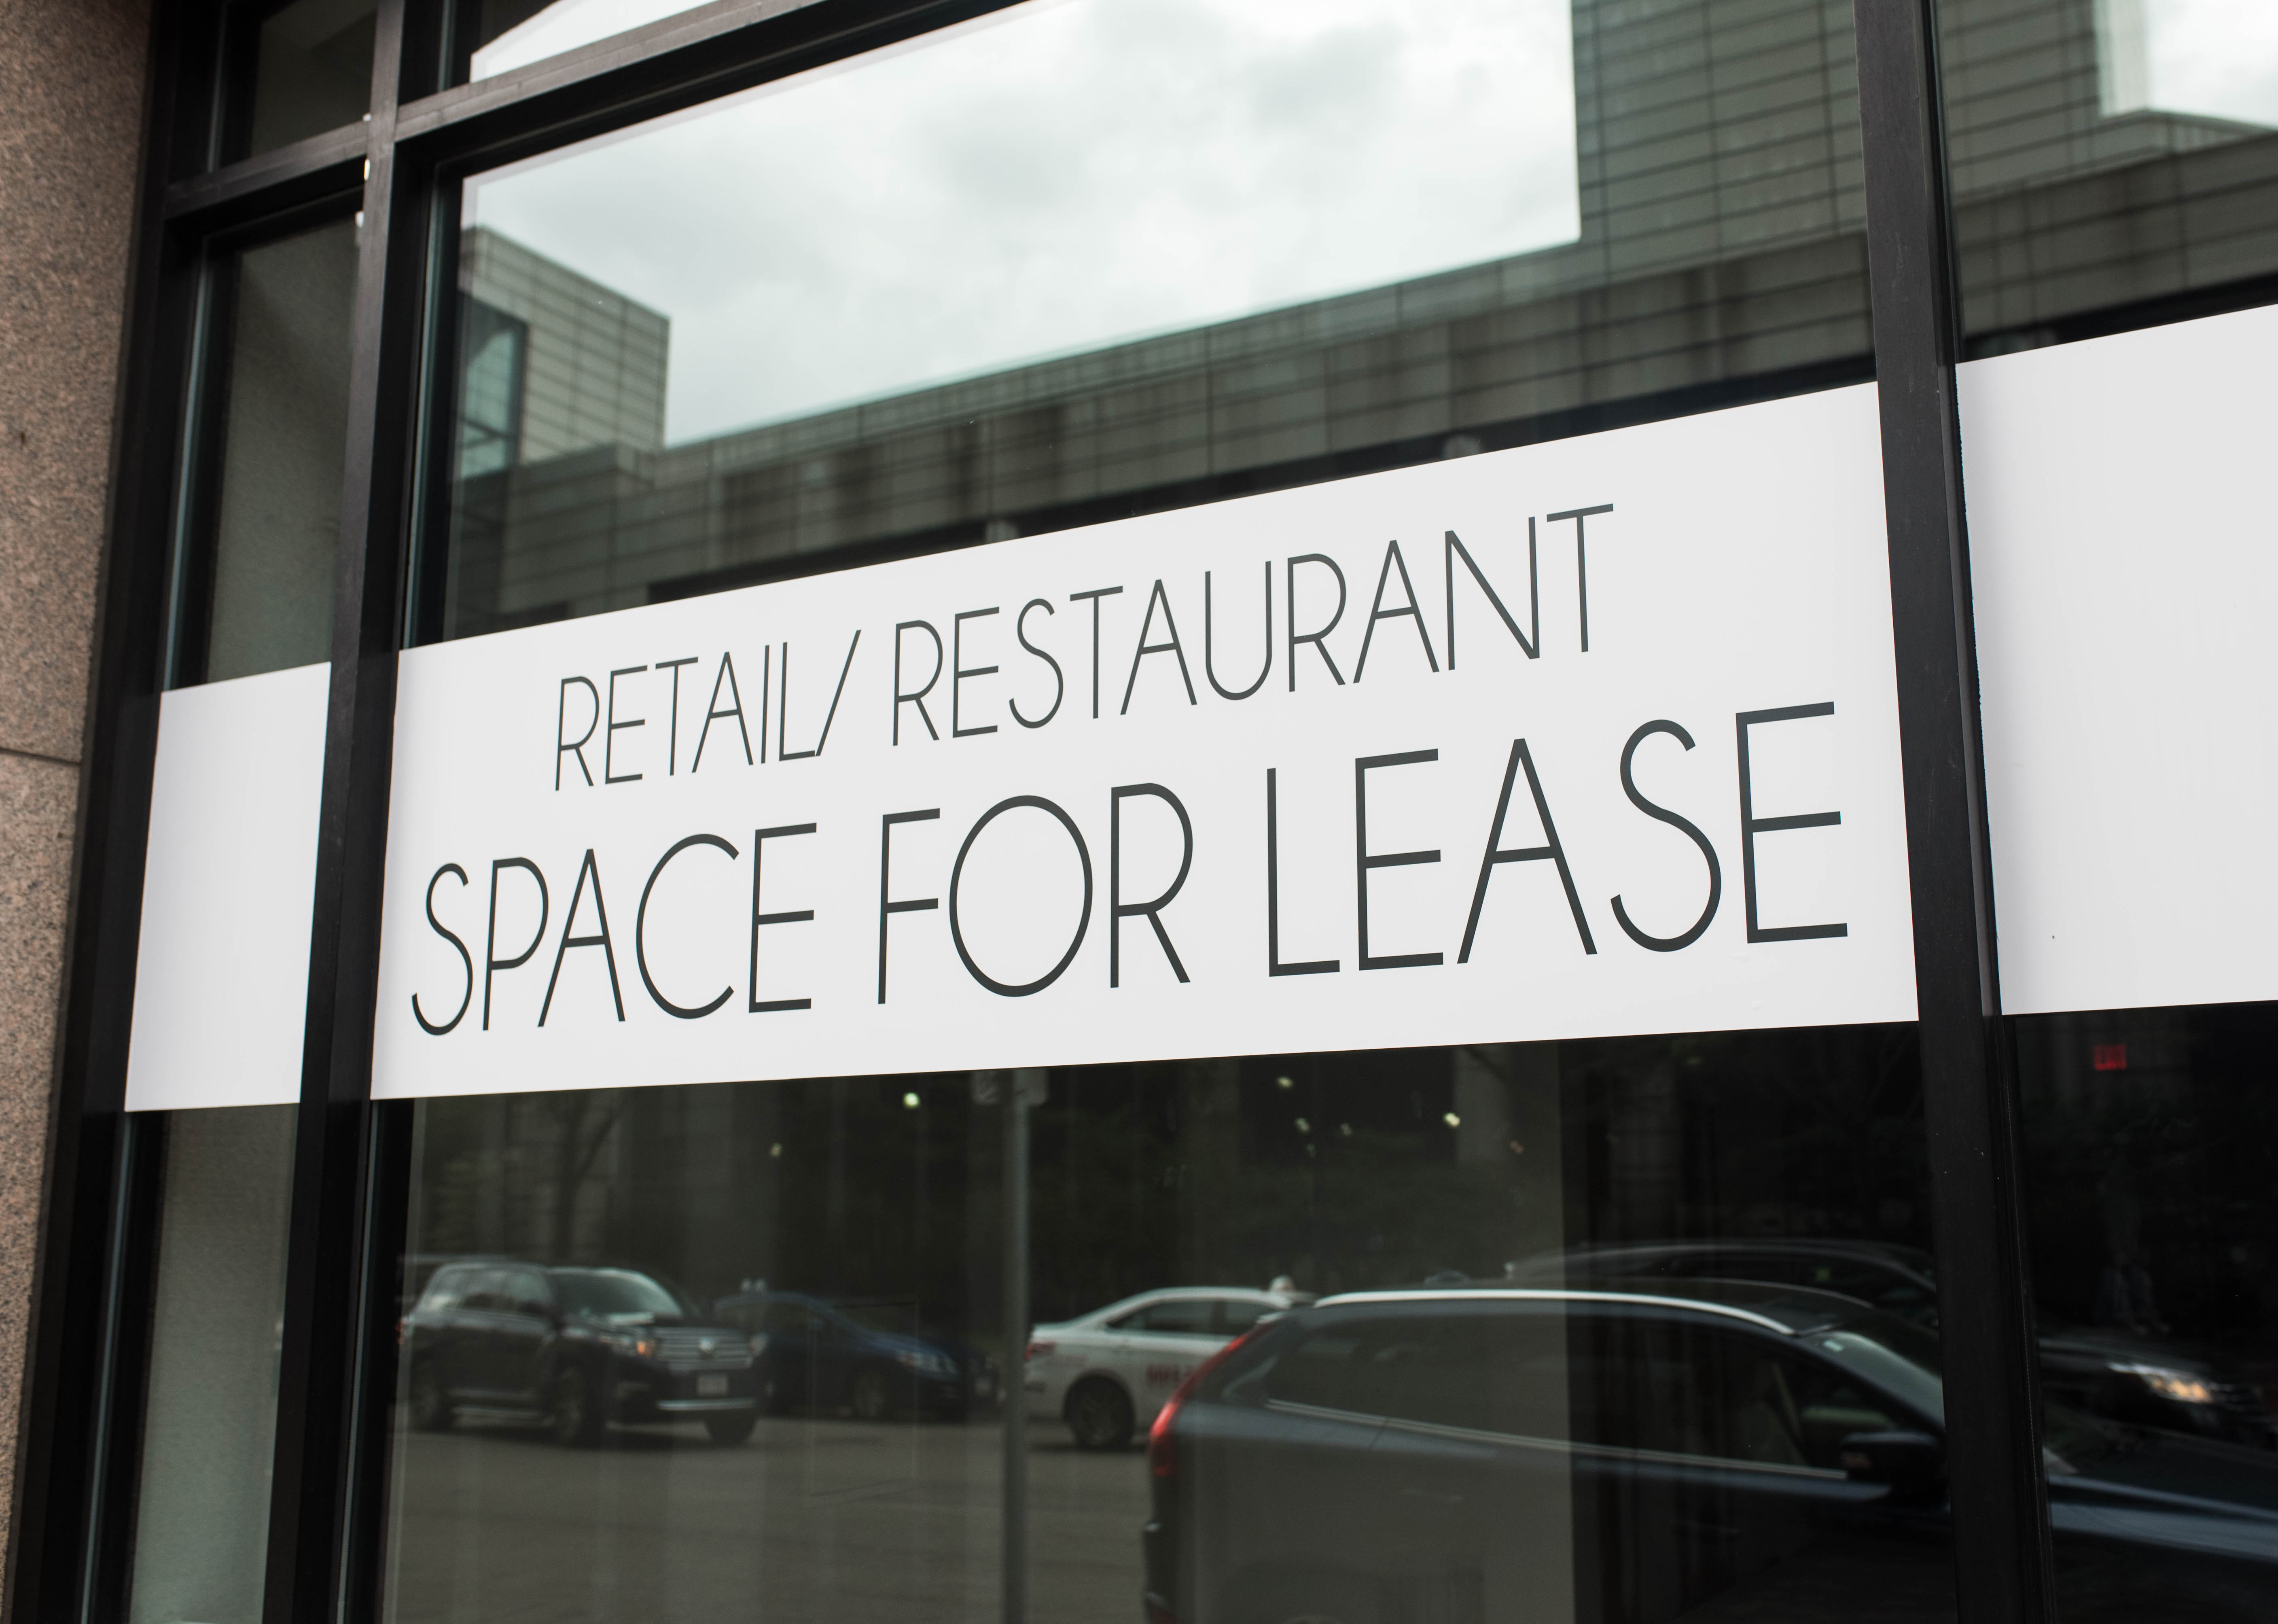 Retail or Restaurant Space Glass Etching